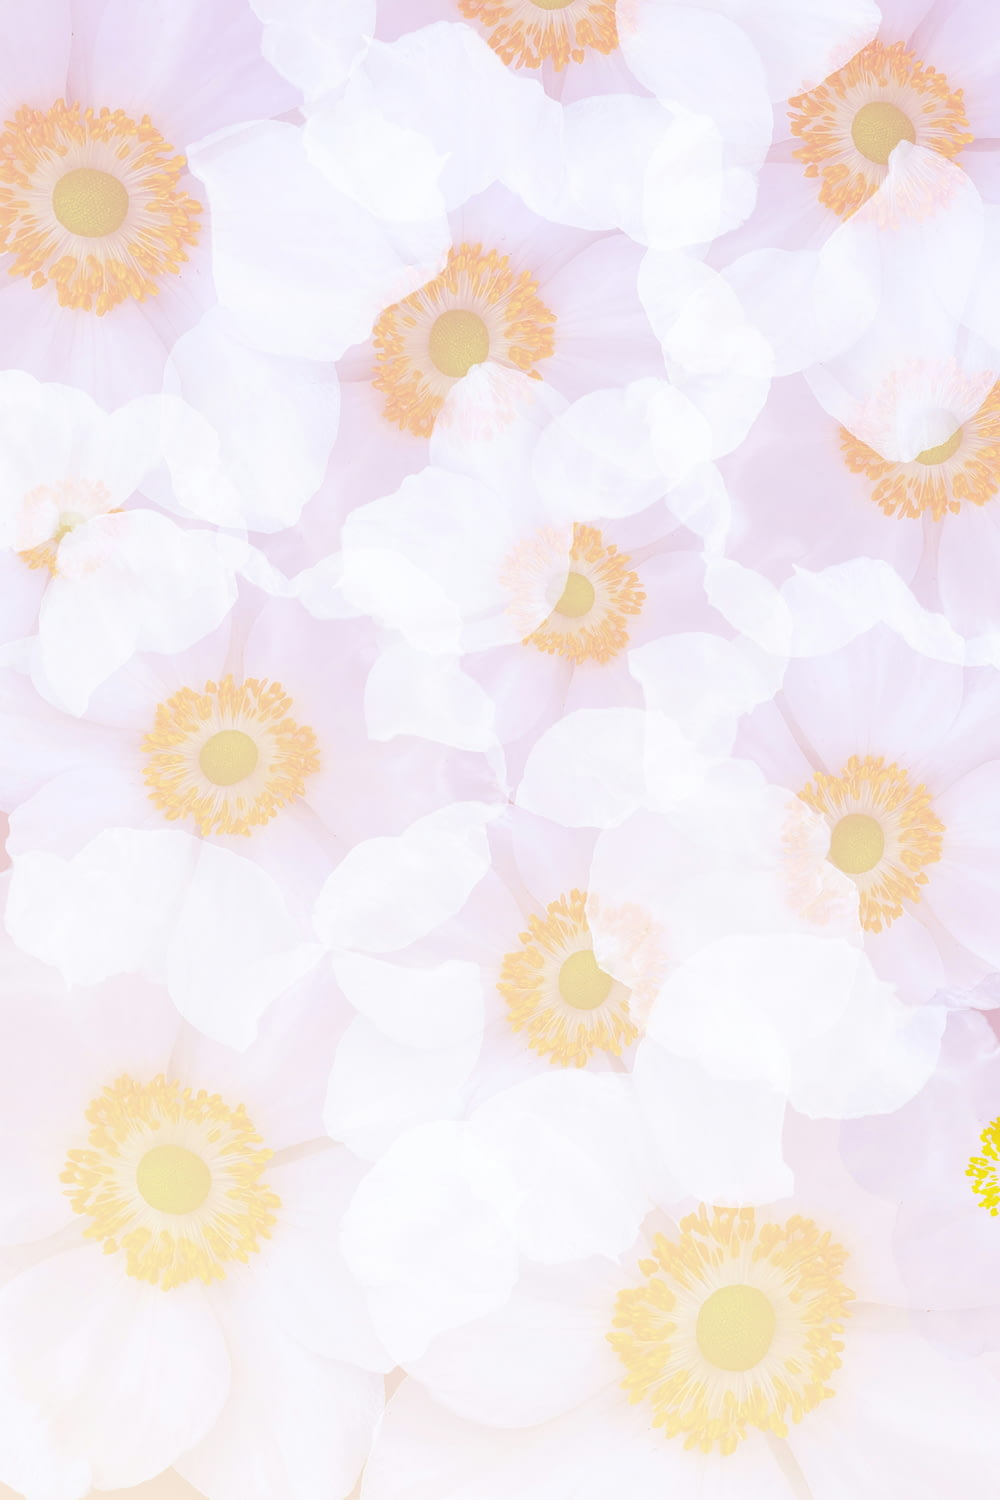 a bunch of white and yellow flowers on a pink background